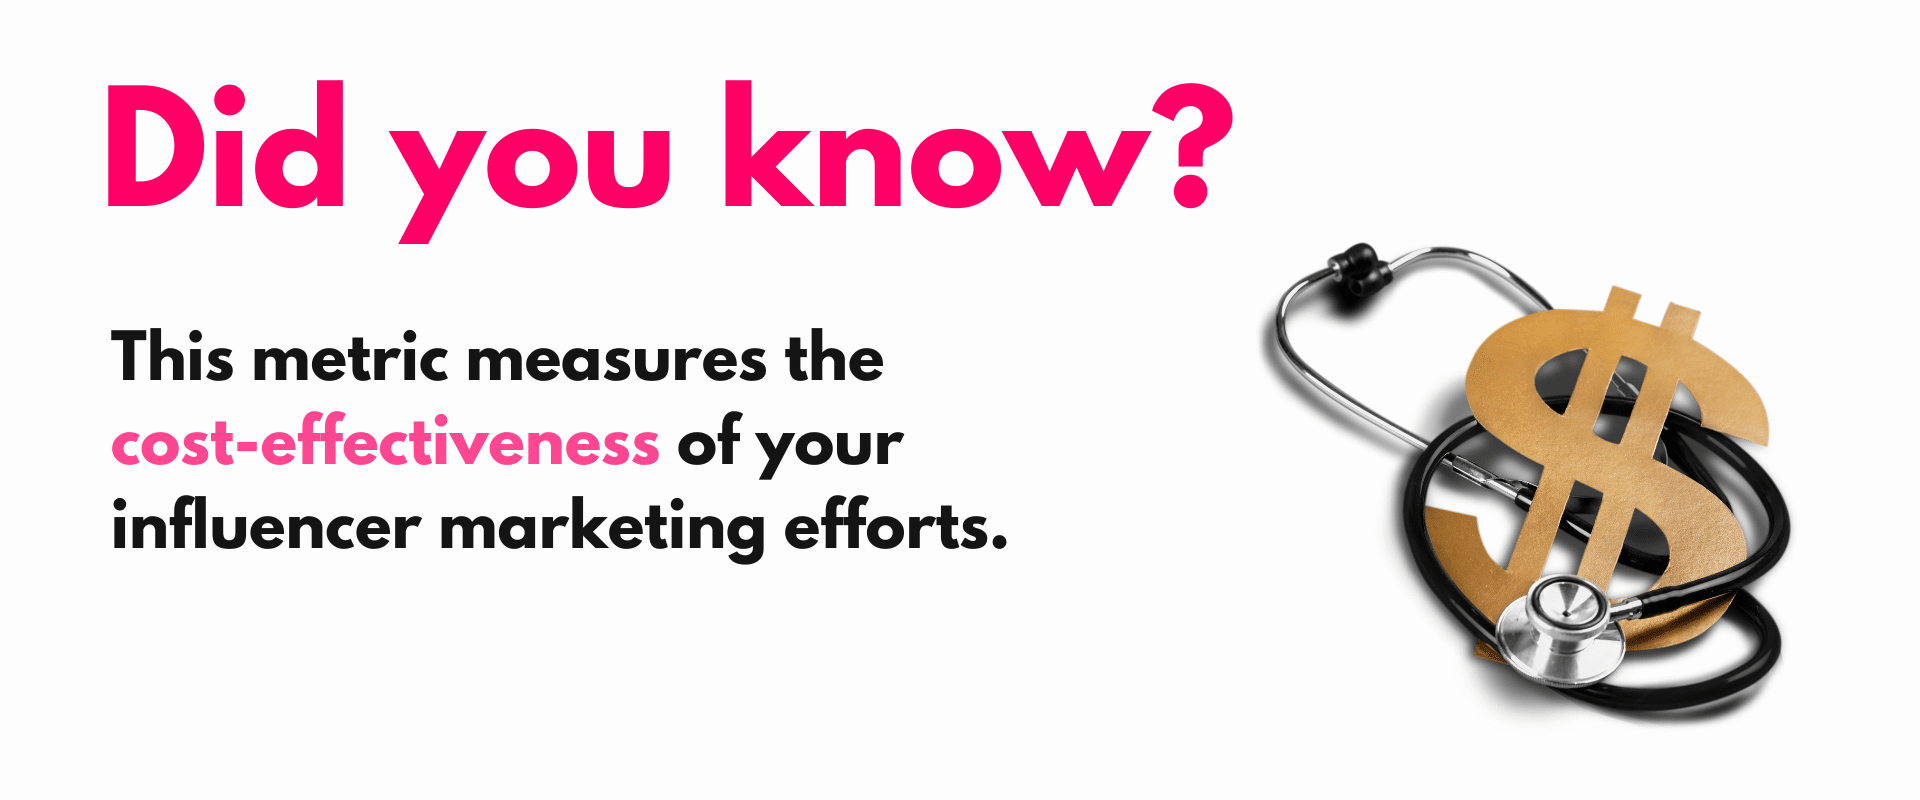 This metric measures the cost effectiveness of your influence marketing efforts.